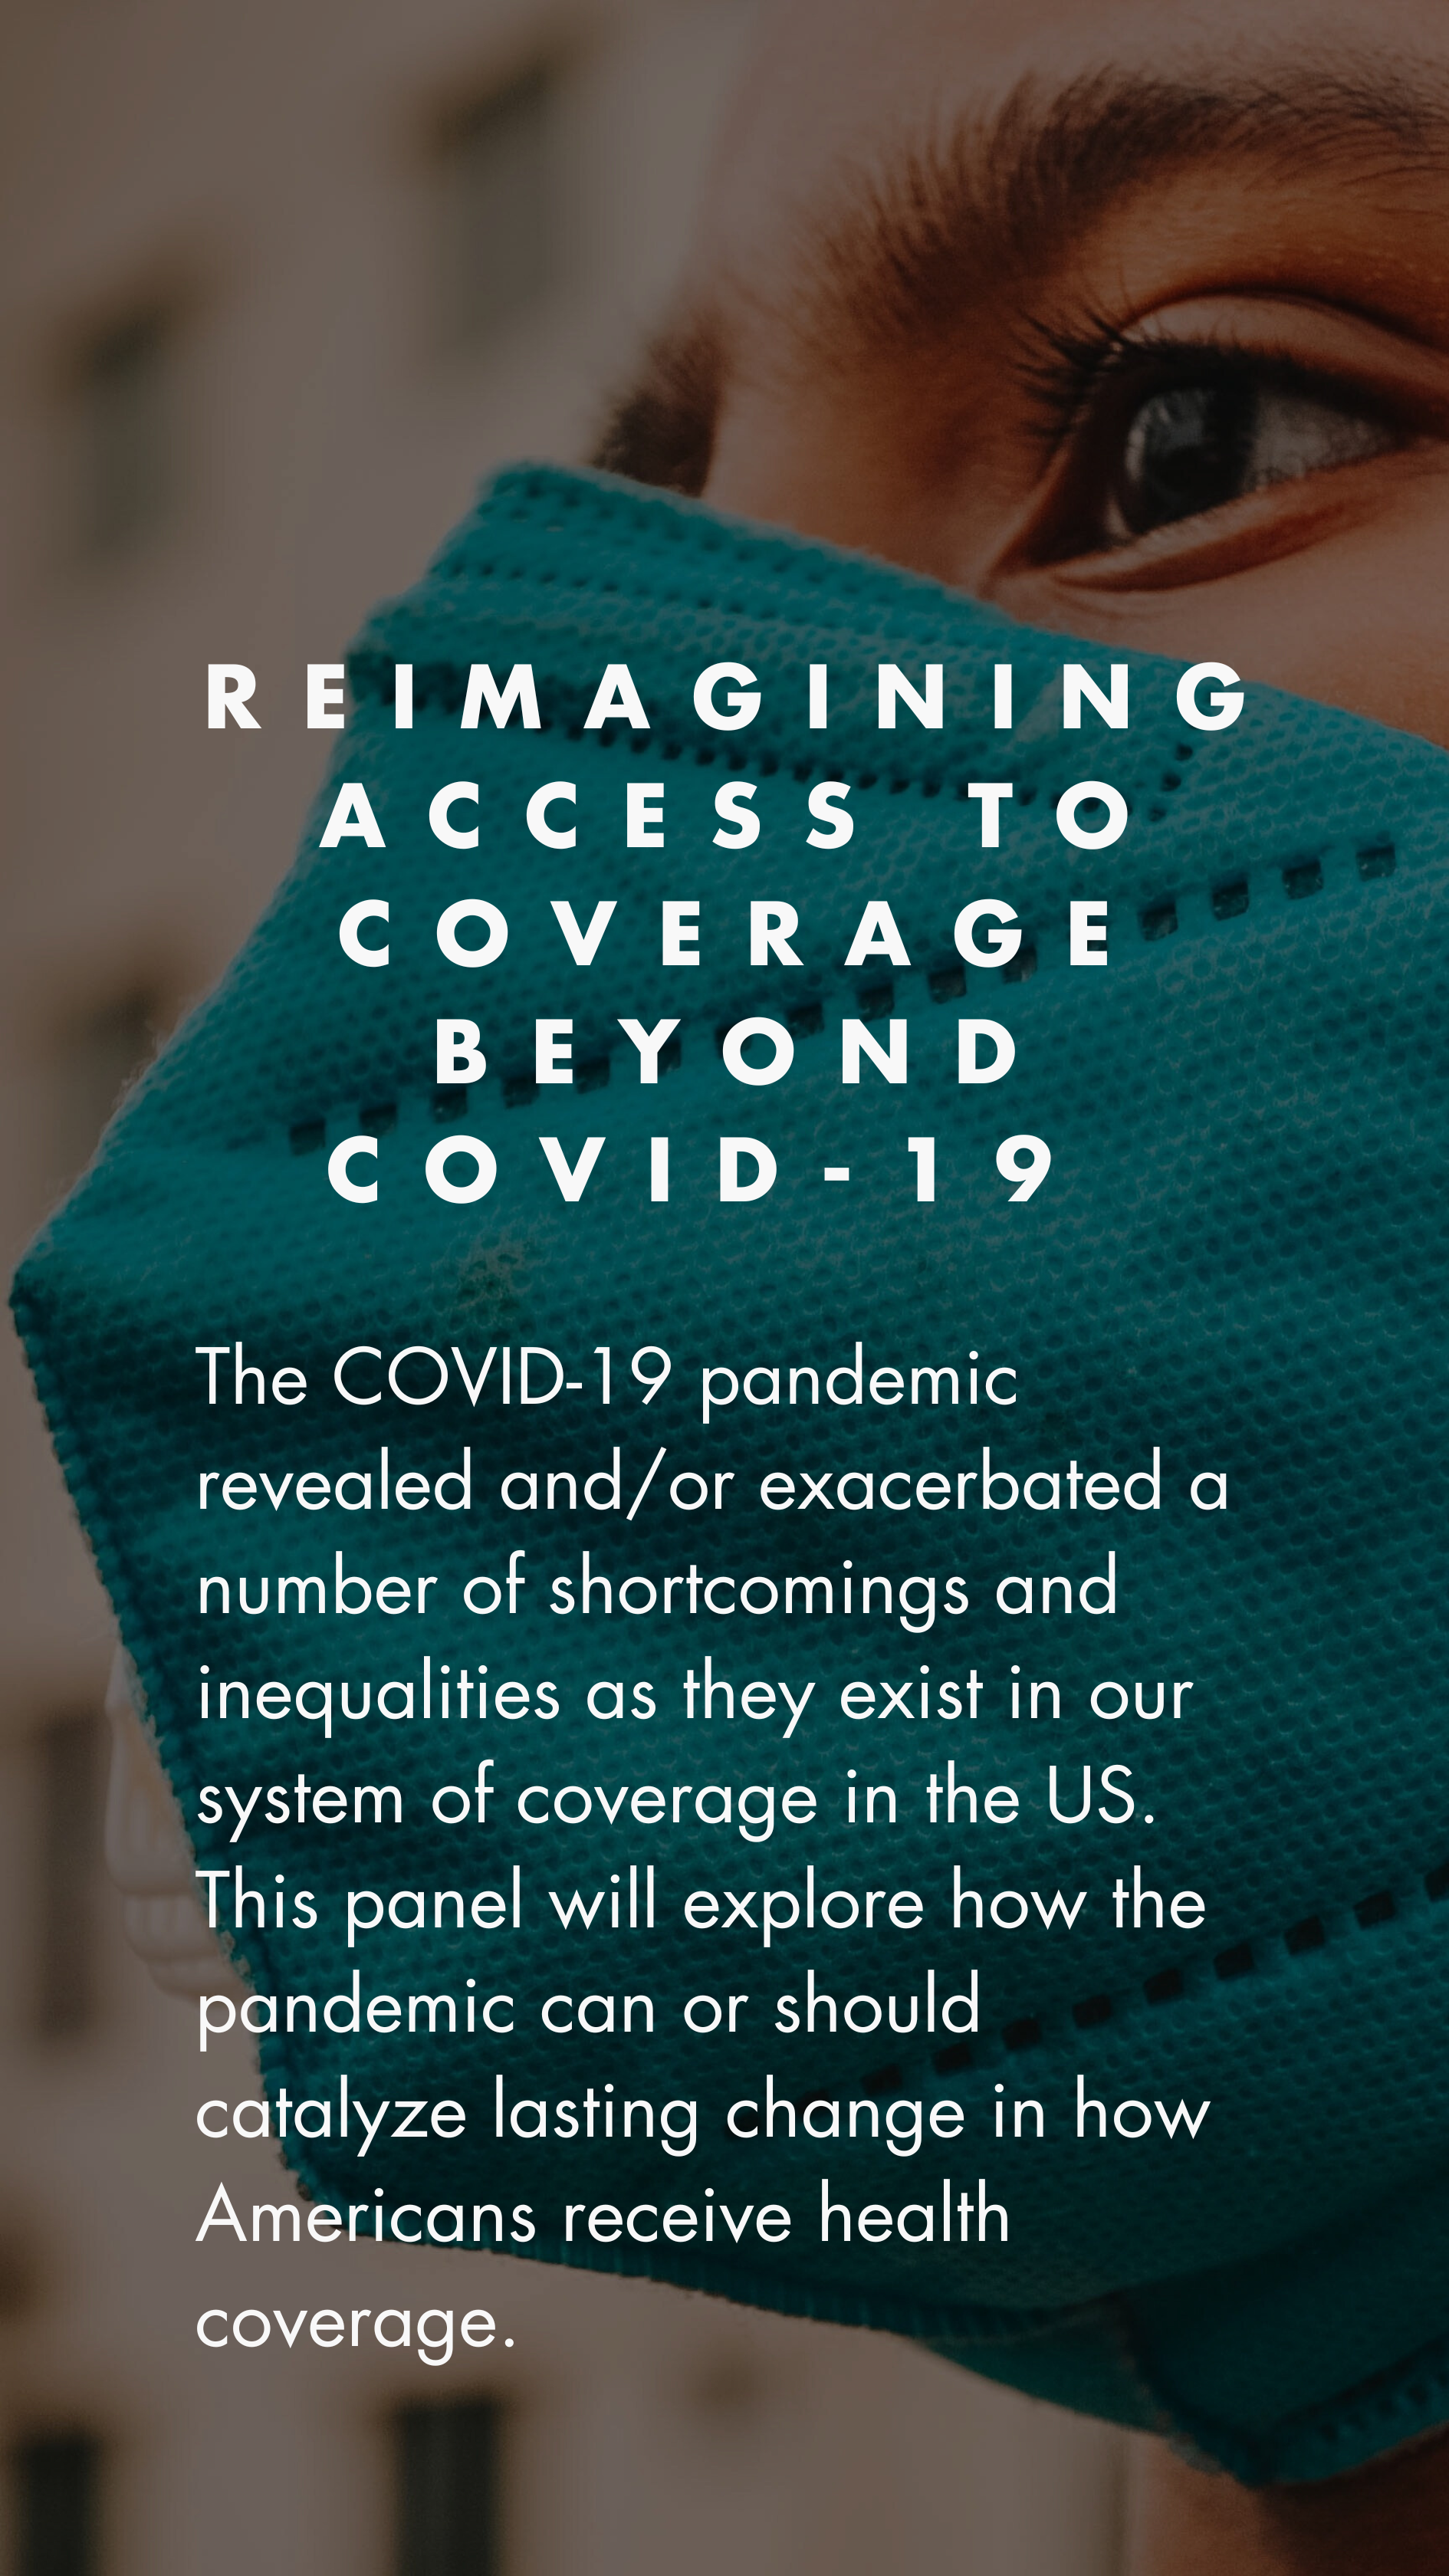 Reimagining access to coverage beyond COVID-19 